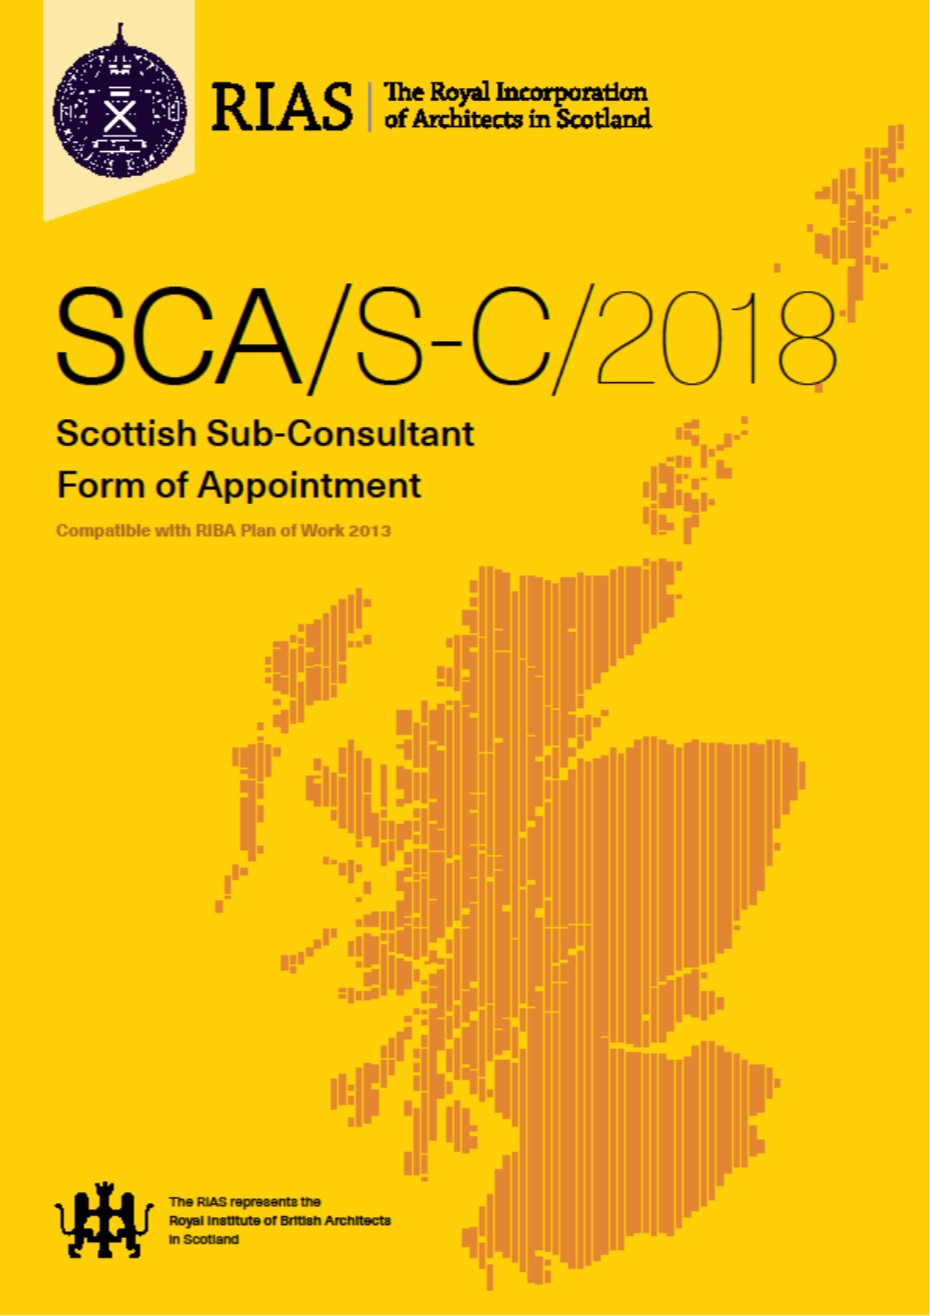 Scottish Sub-Consultant Form of Appointment SCA/S-C/2018